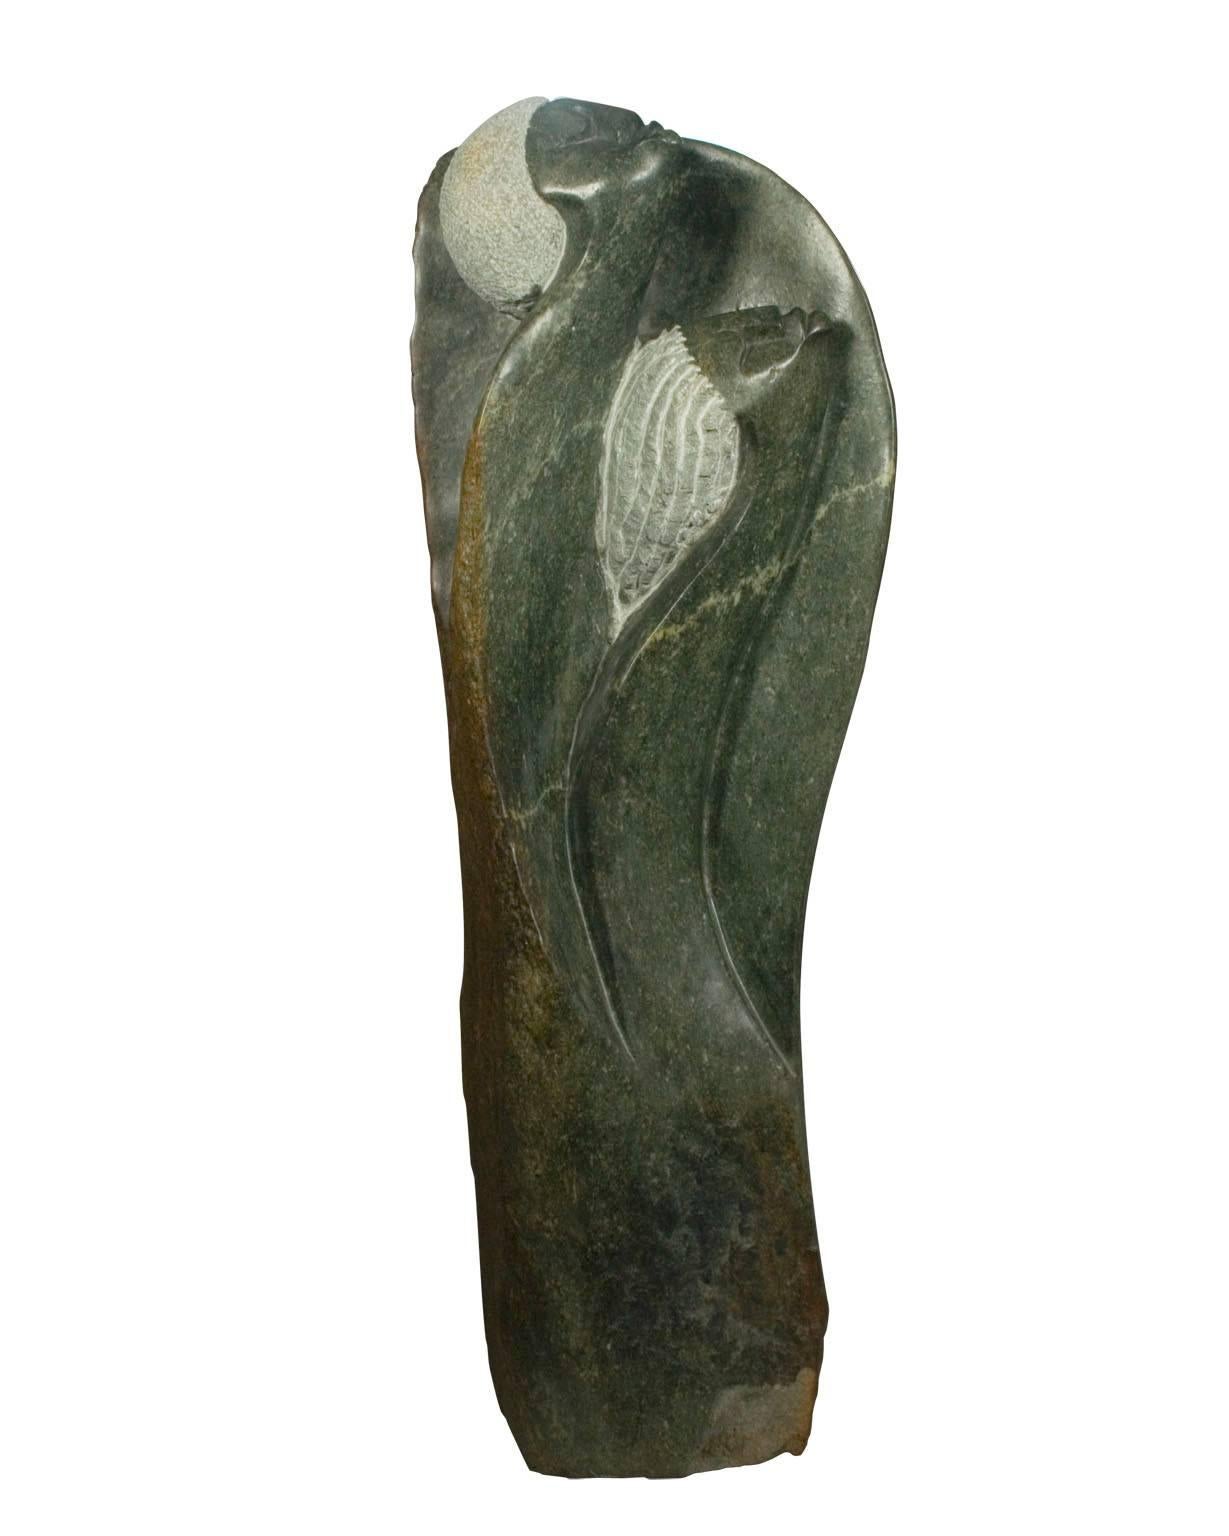 "Protected Spirits" is a sculpture carved from Opal stone signed Picket, who is part of the Shona tribe in Zimbabwe. It depicts two abstracted figures, presumably spirits, seeming to float upwards. 

38 1/2" x 13 1/2" x 7 1/4" 

Picket Mazhindu